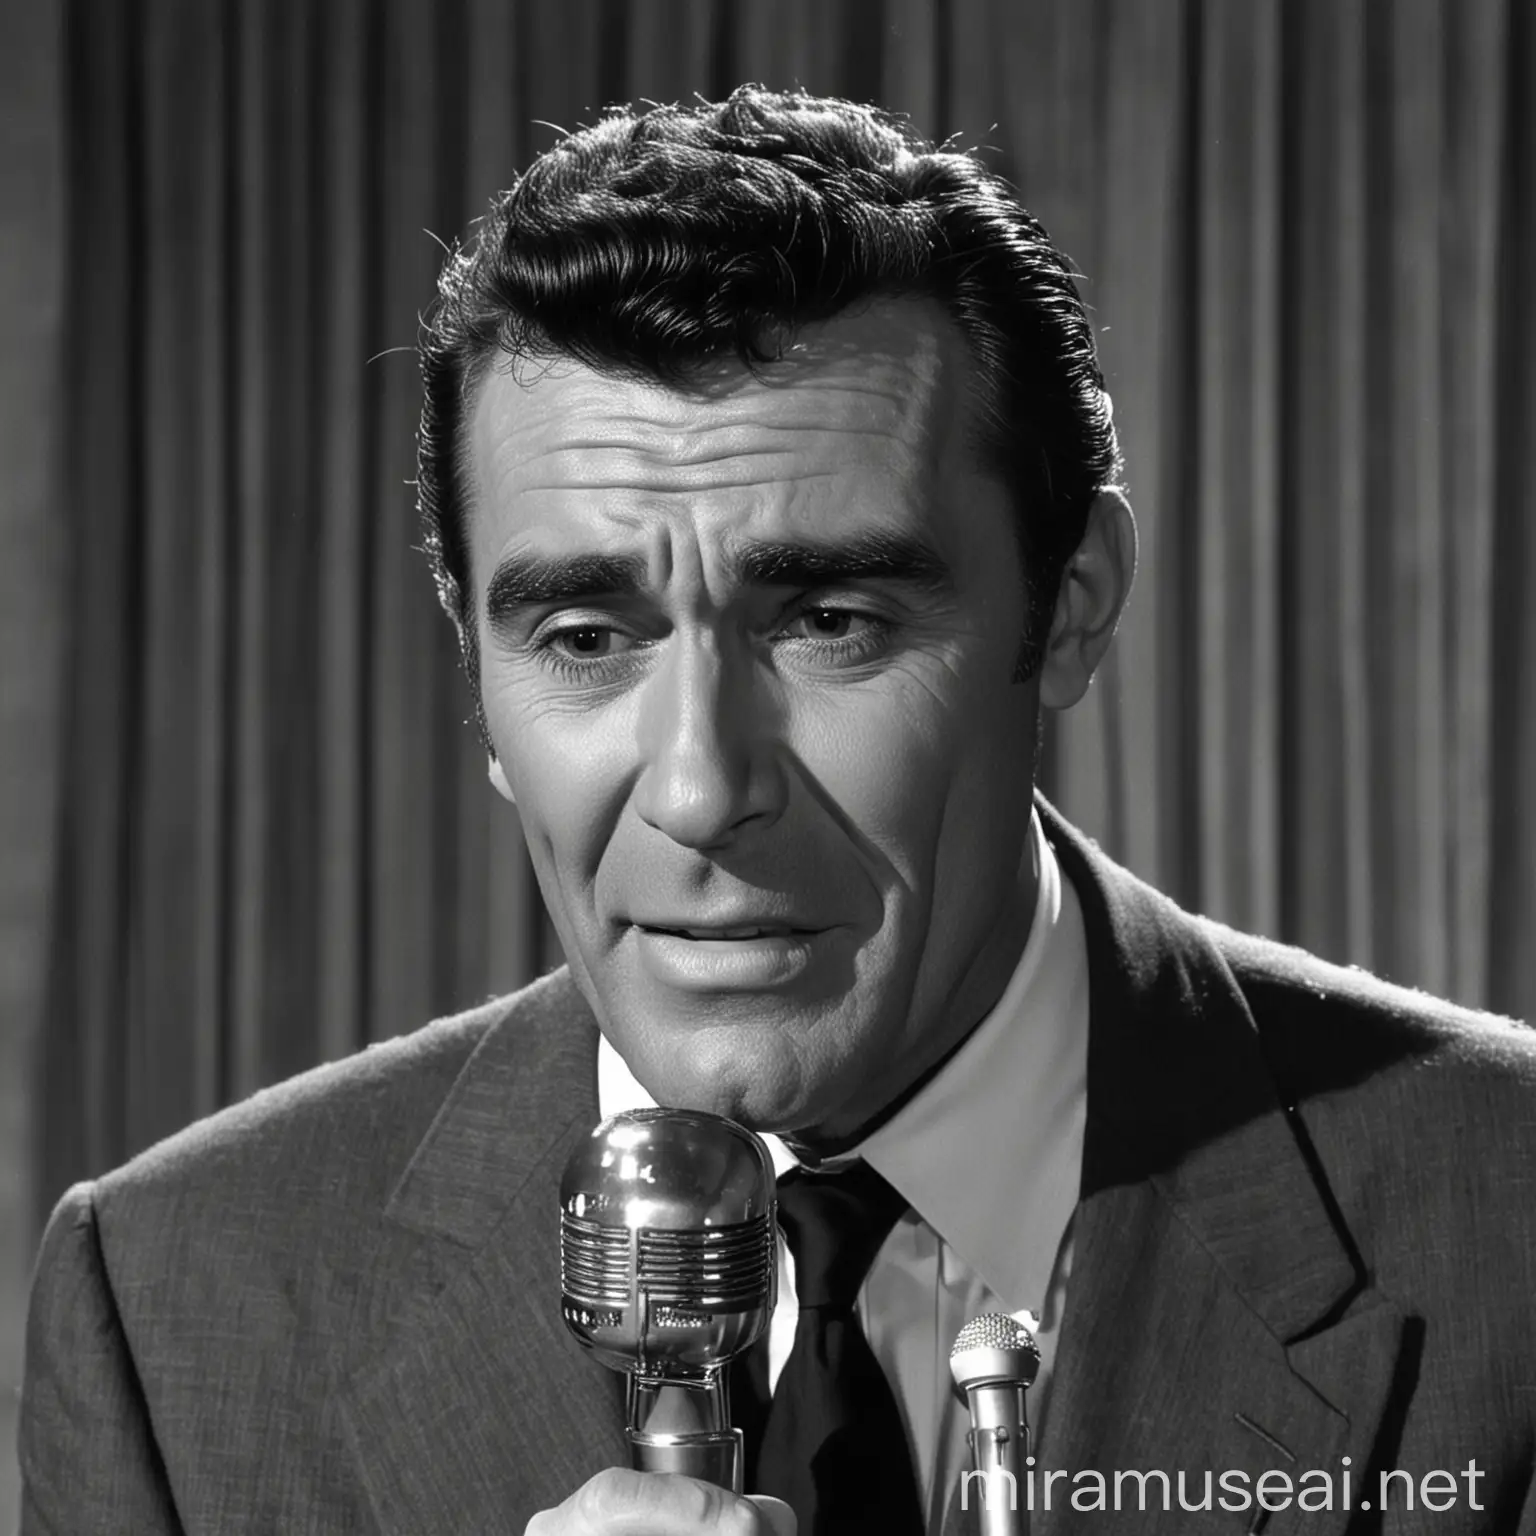 Rod Serling Serenading with Passionate Heartfelt Song